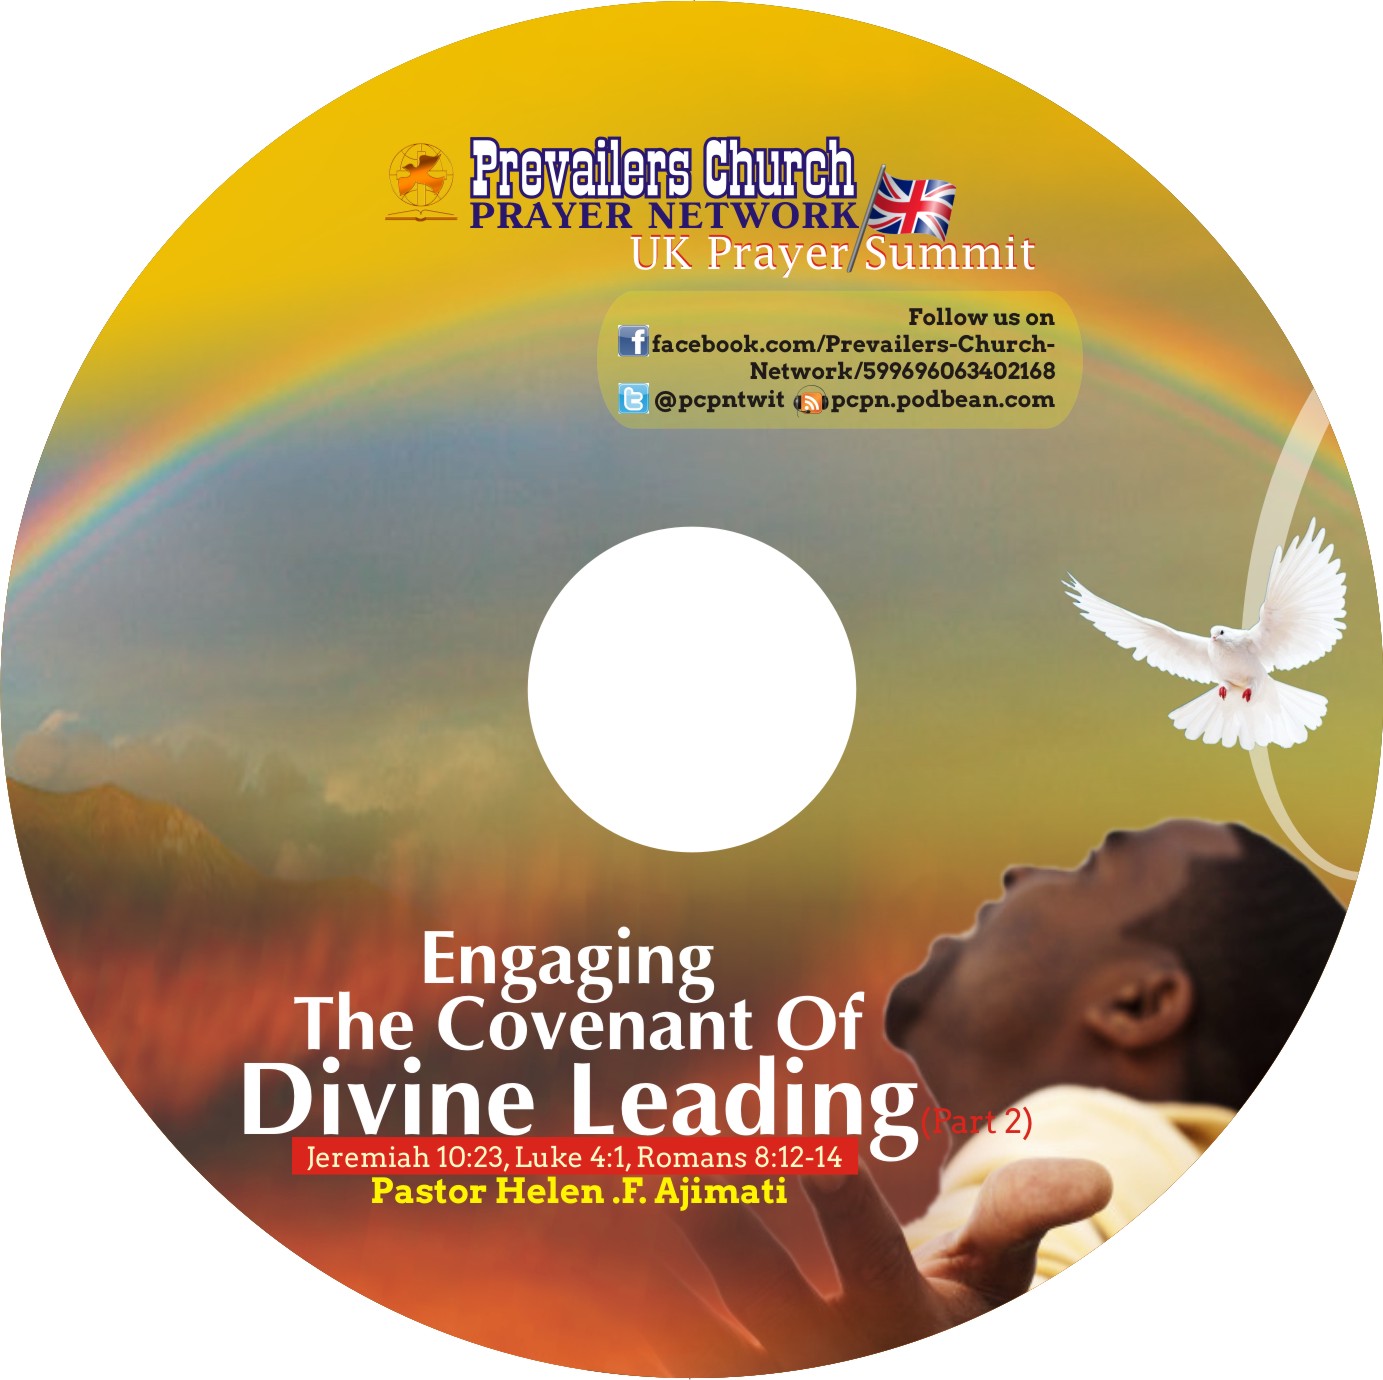 01 Engaging The Covenant Of Divine Leading - Opening Prayer & Worship